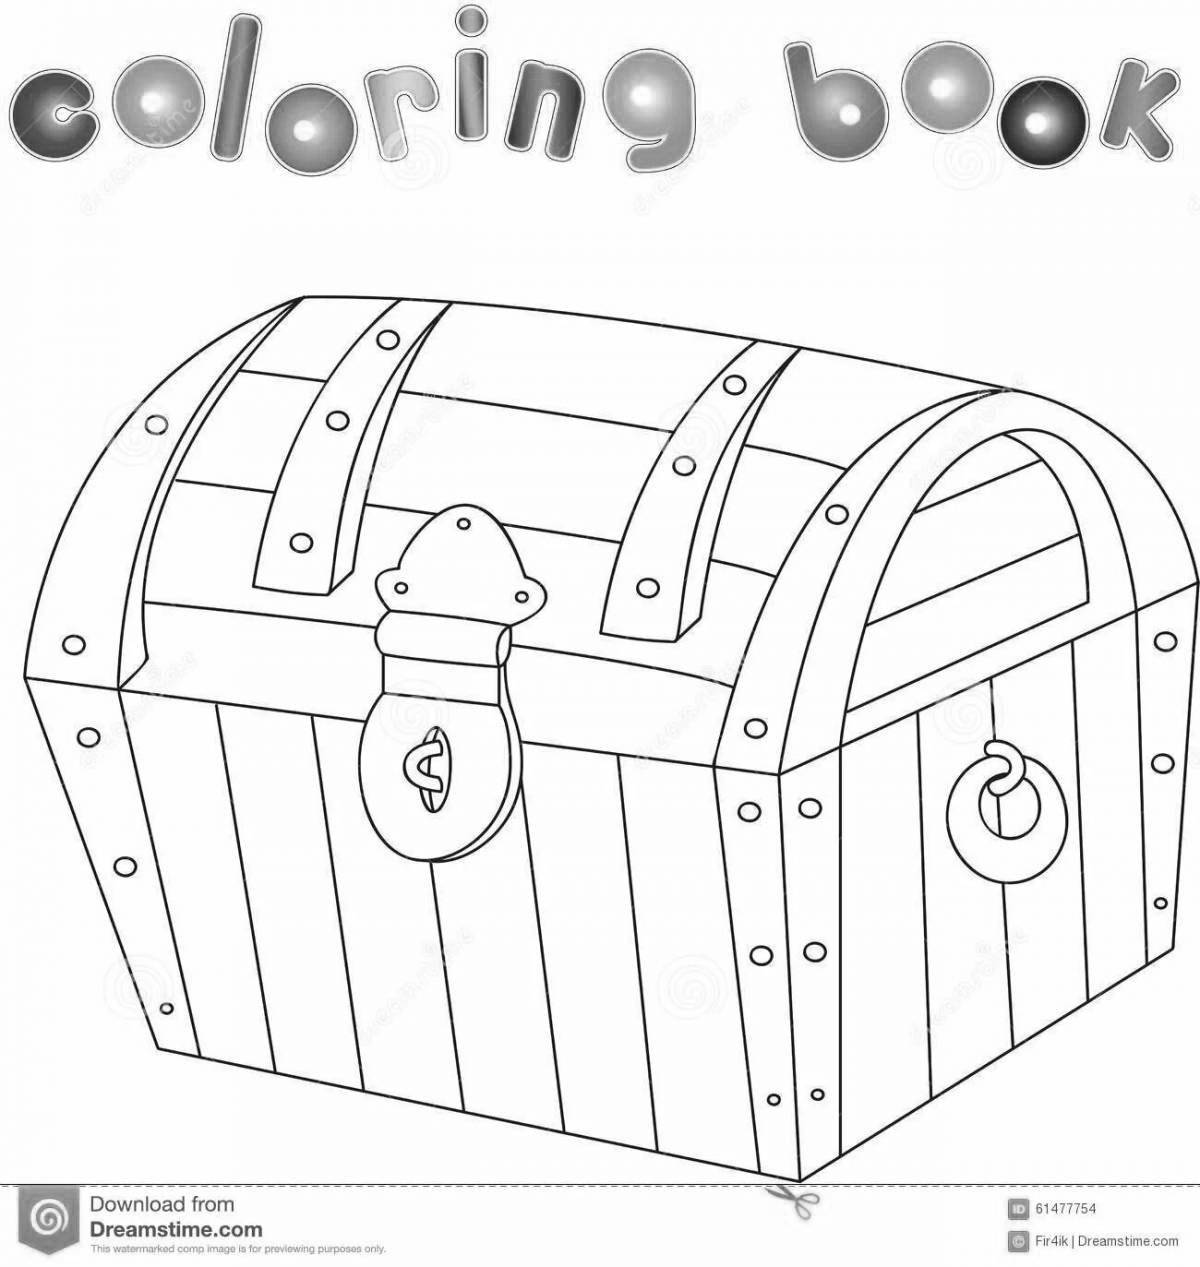 Coloring chests for kids